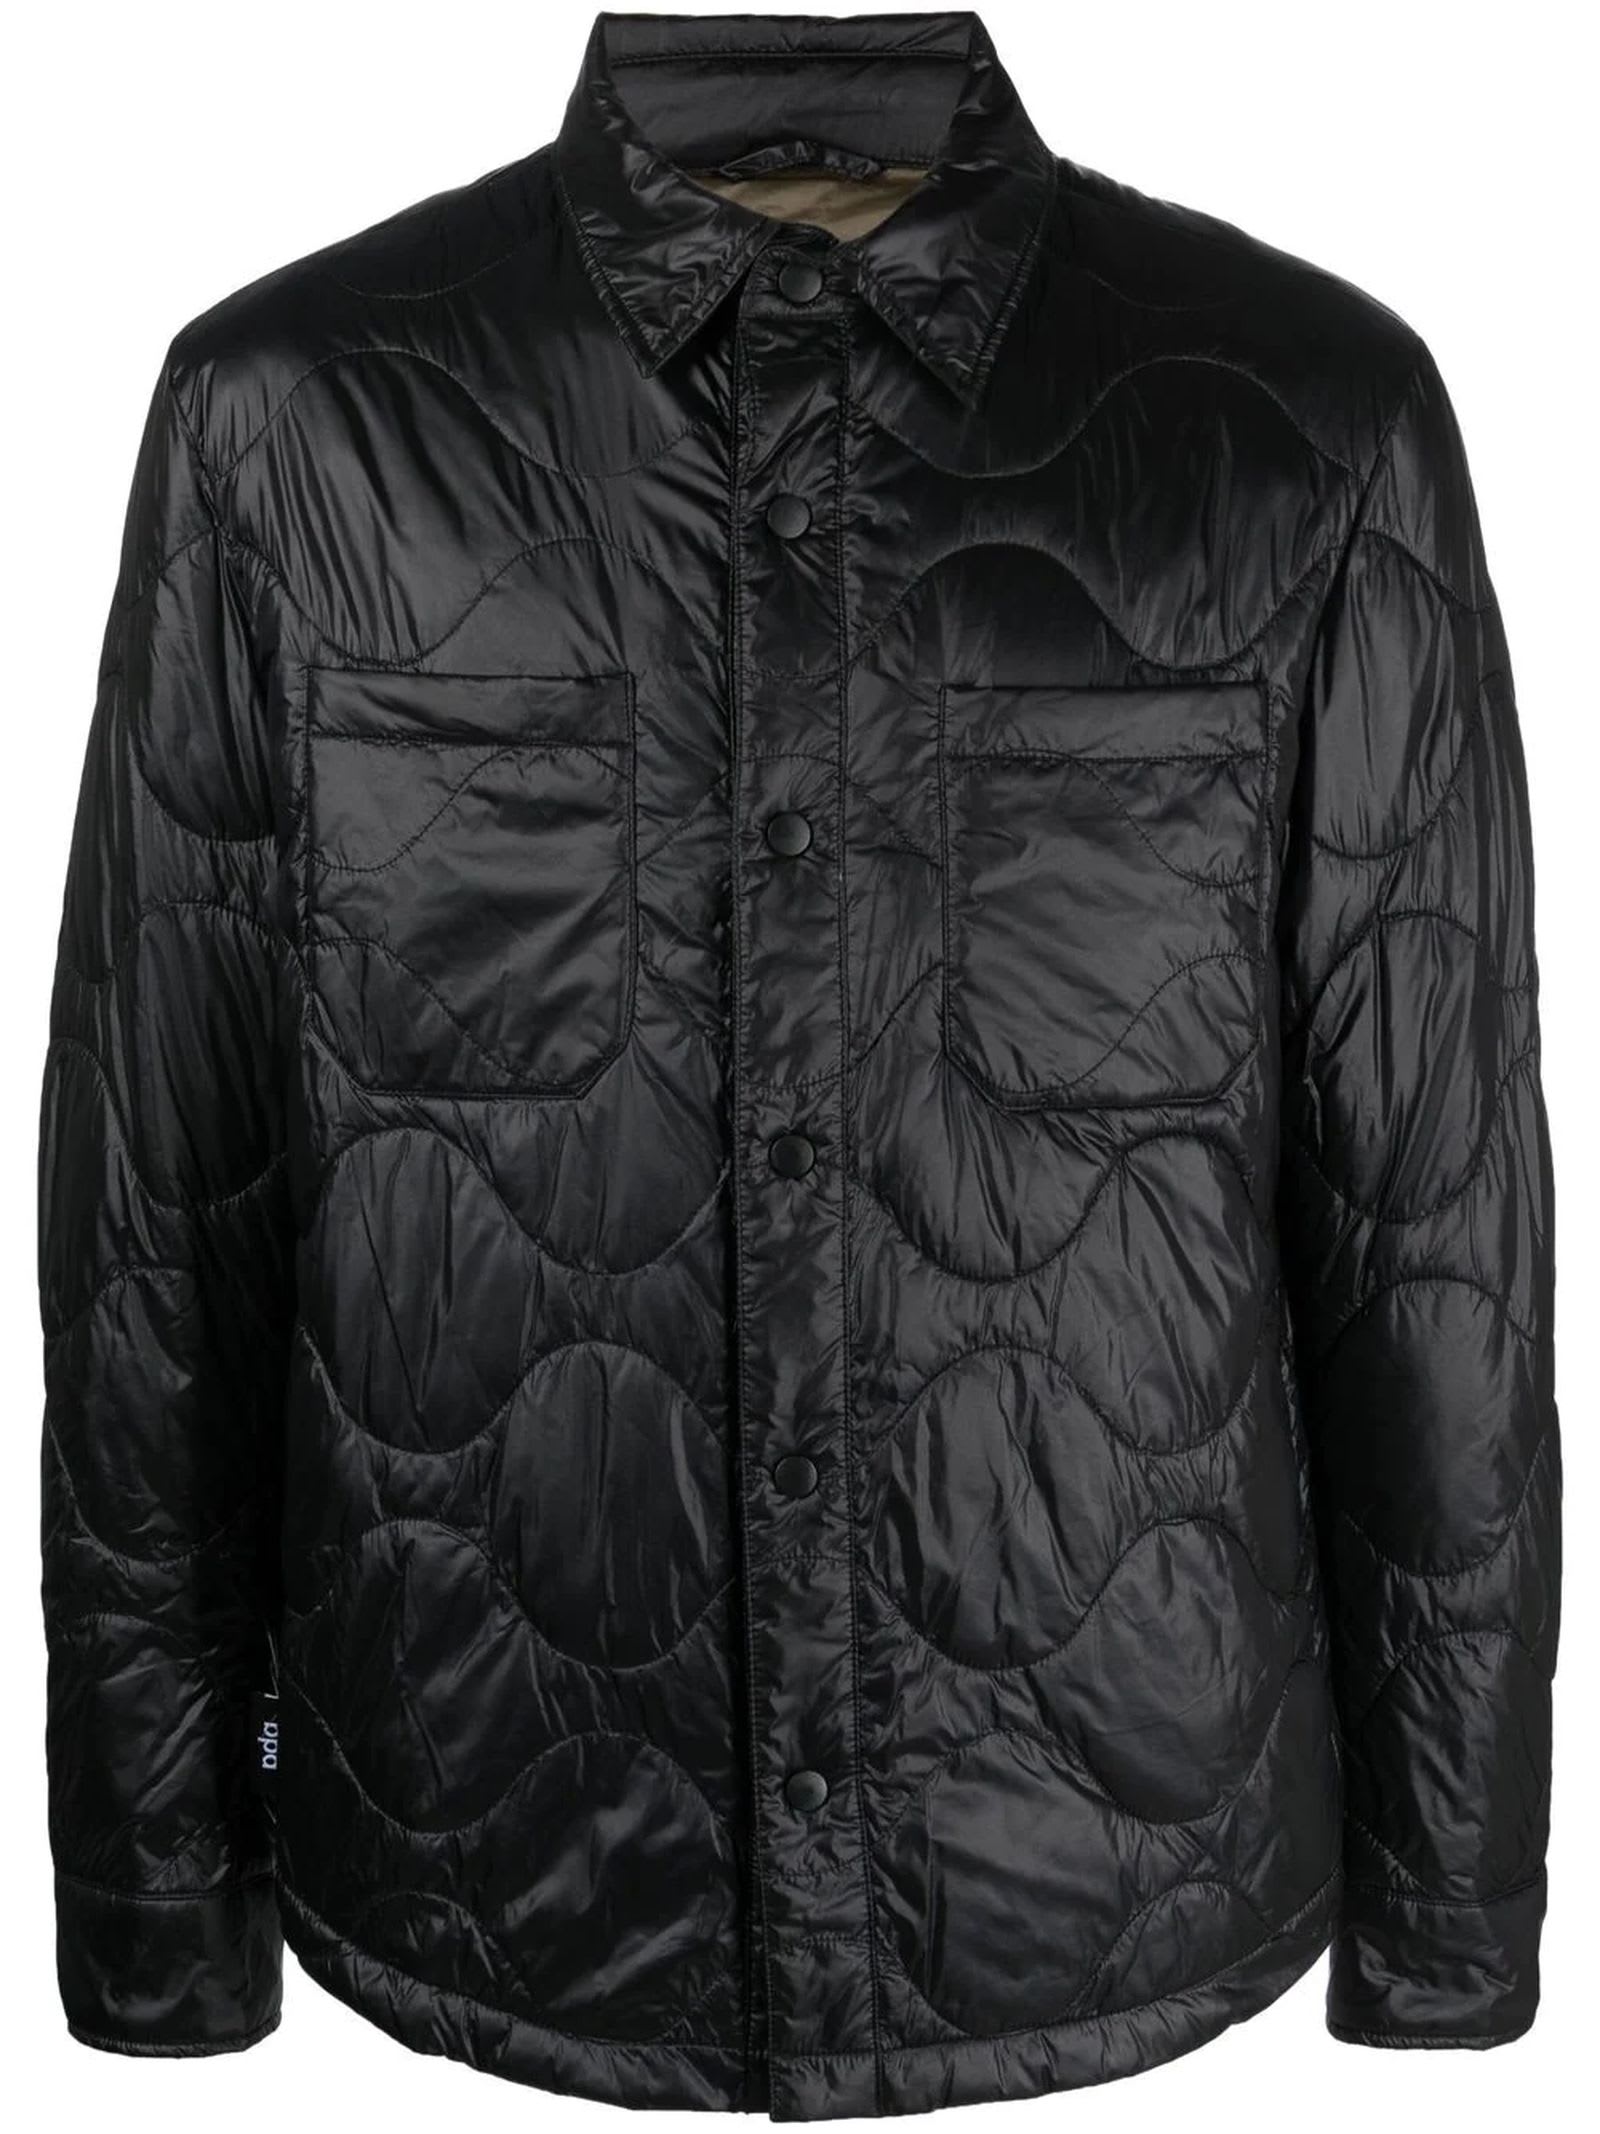 Bpd (Be Proud of this stress) Black Quilted Padded Jacket